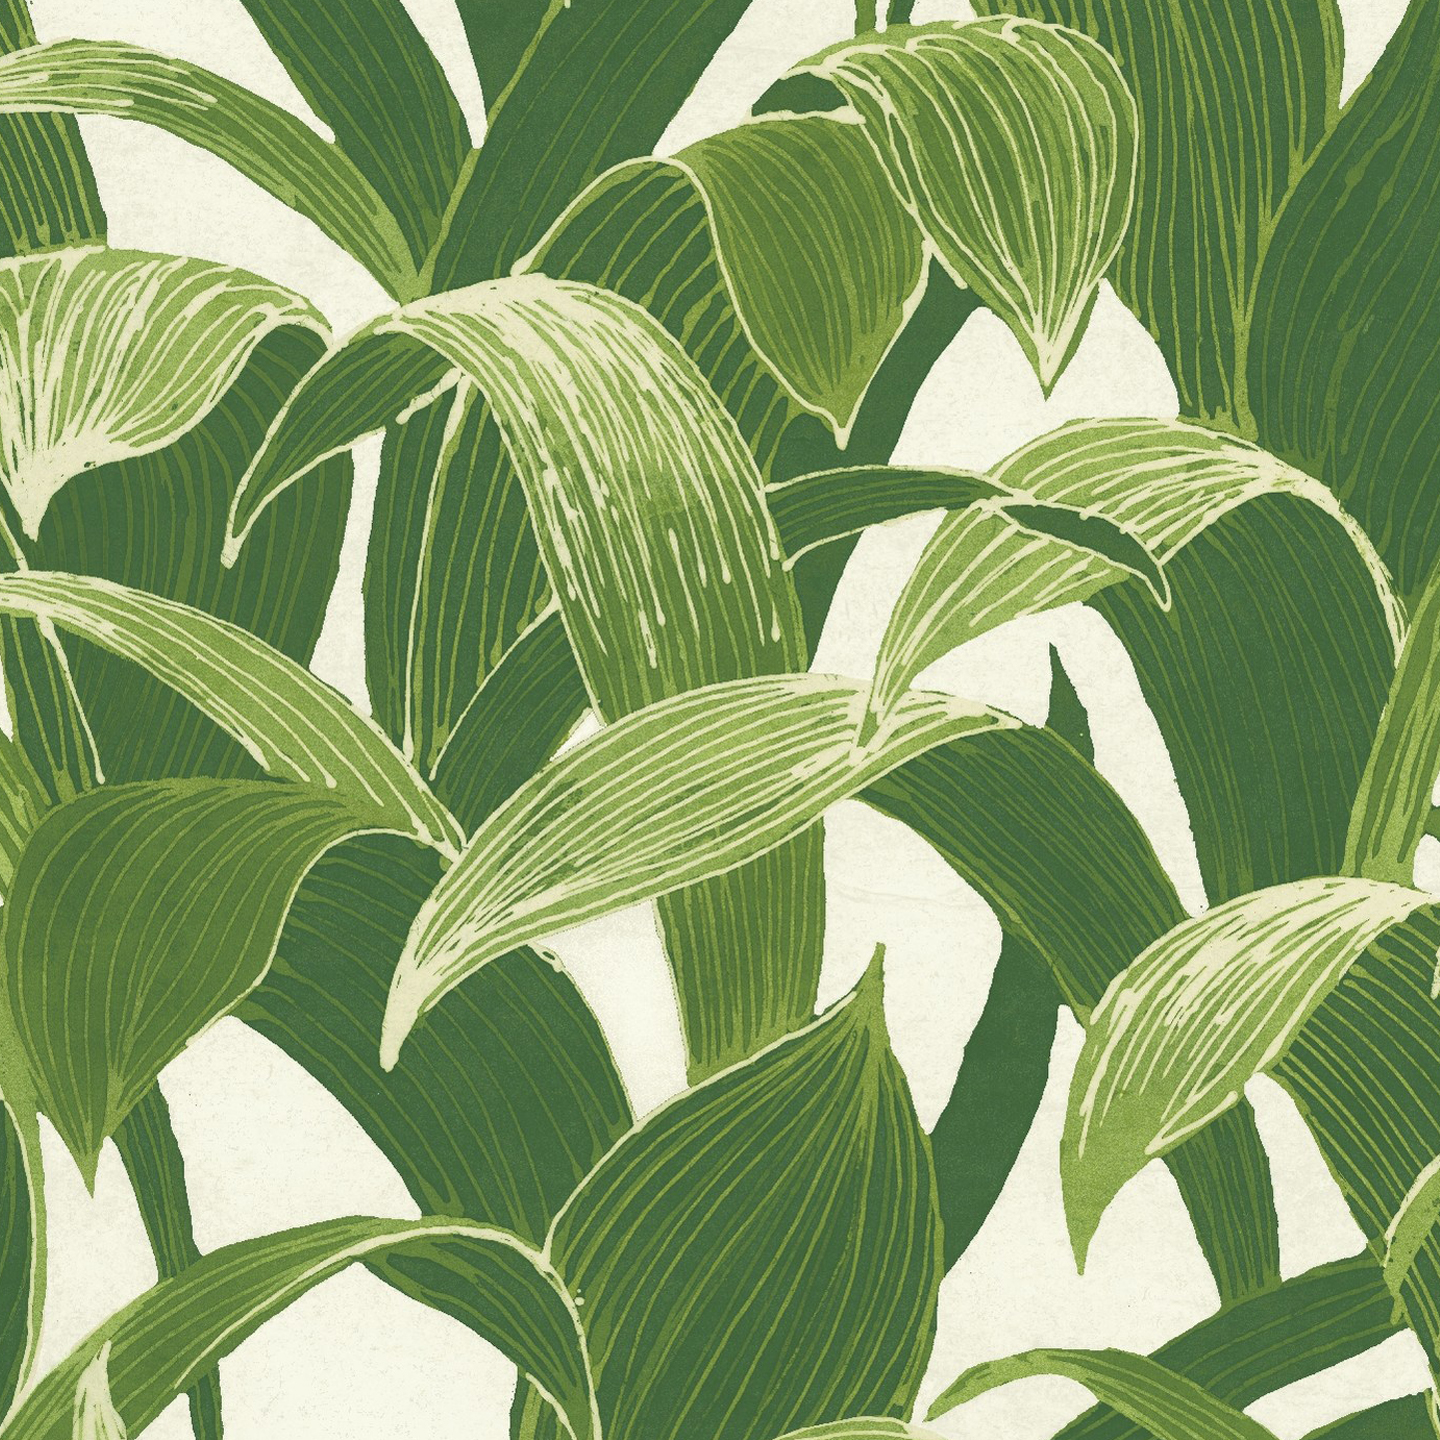 Putting up Palm Leaf Temporary Wallpaper  YouTube